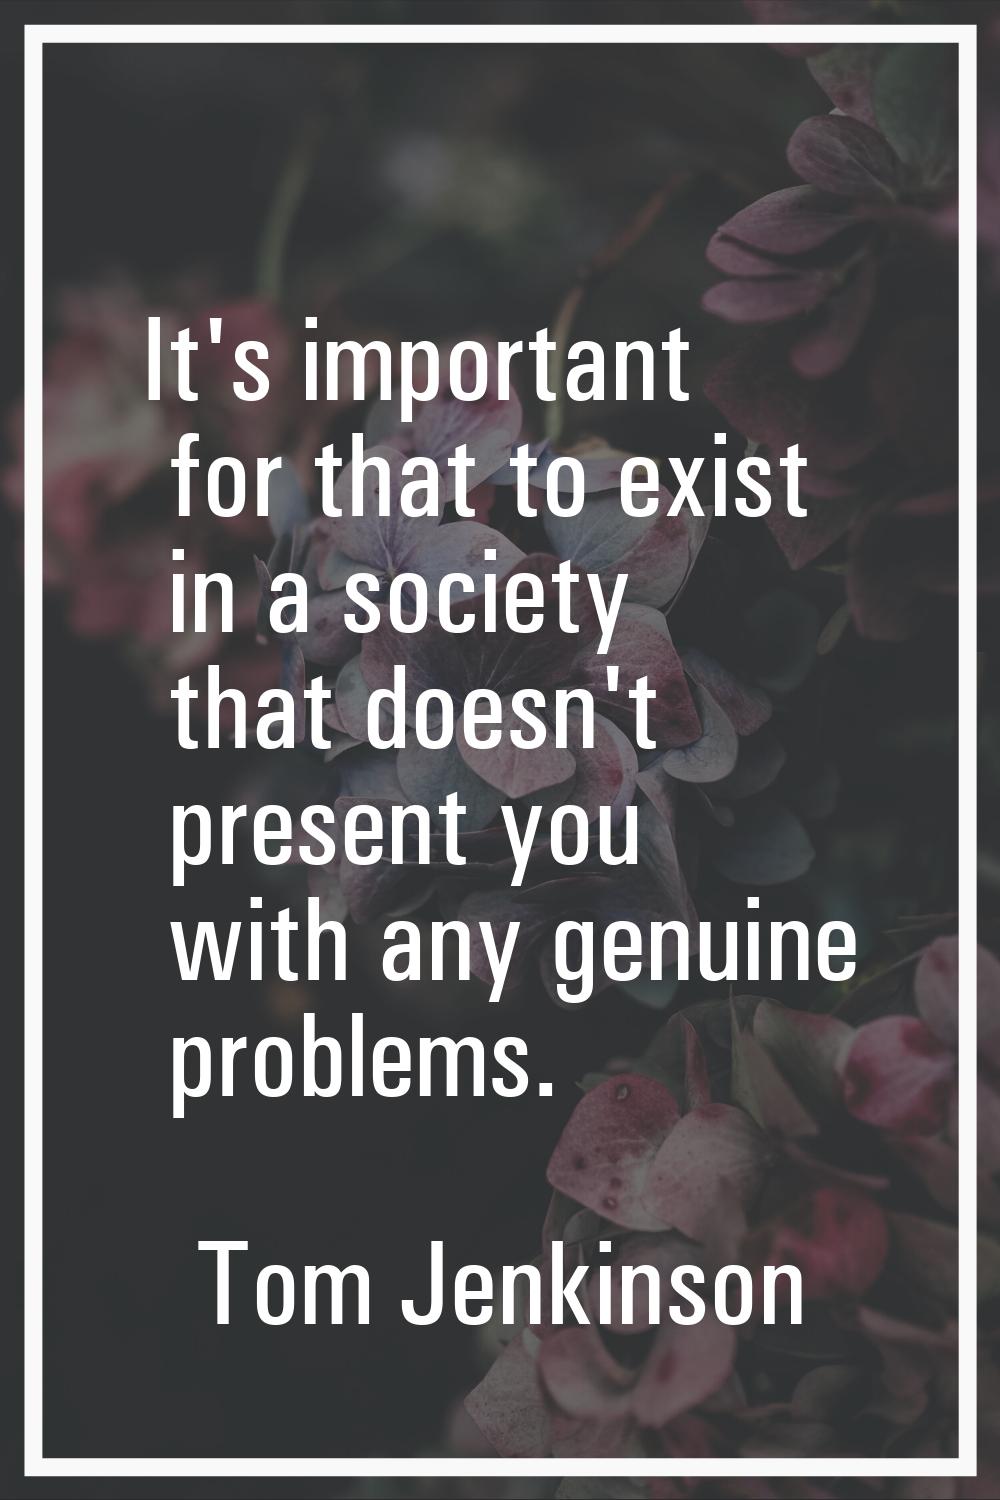 It's important for that to exist in a society that doesn't present you with any genuine problems.